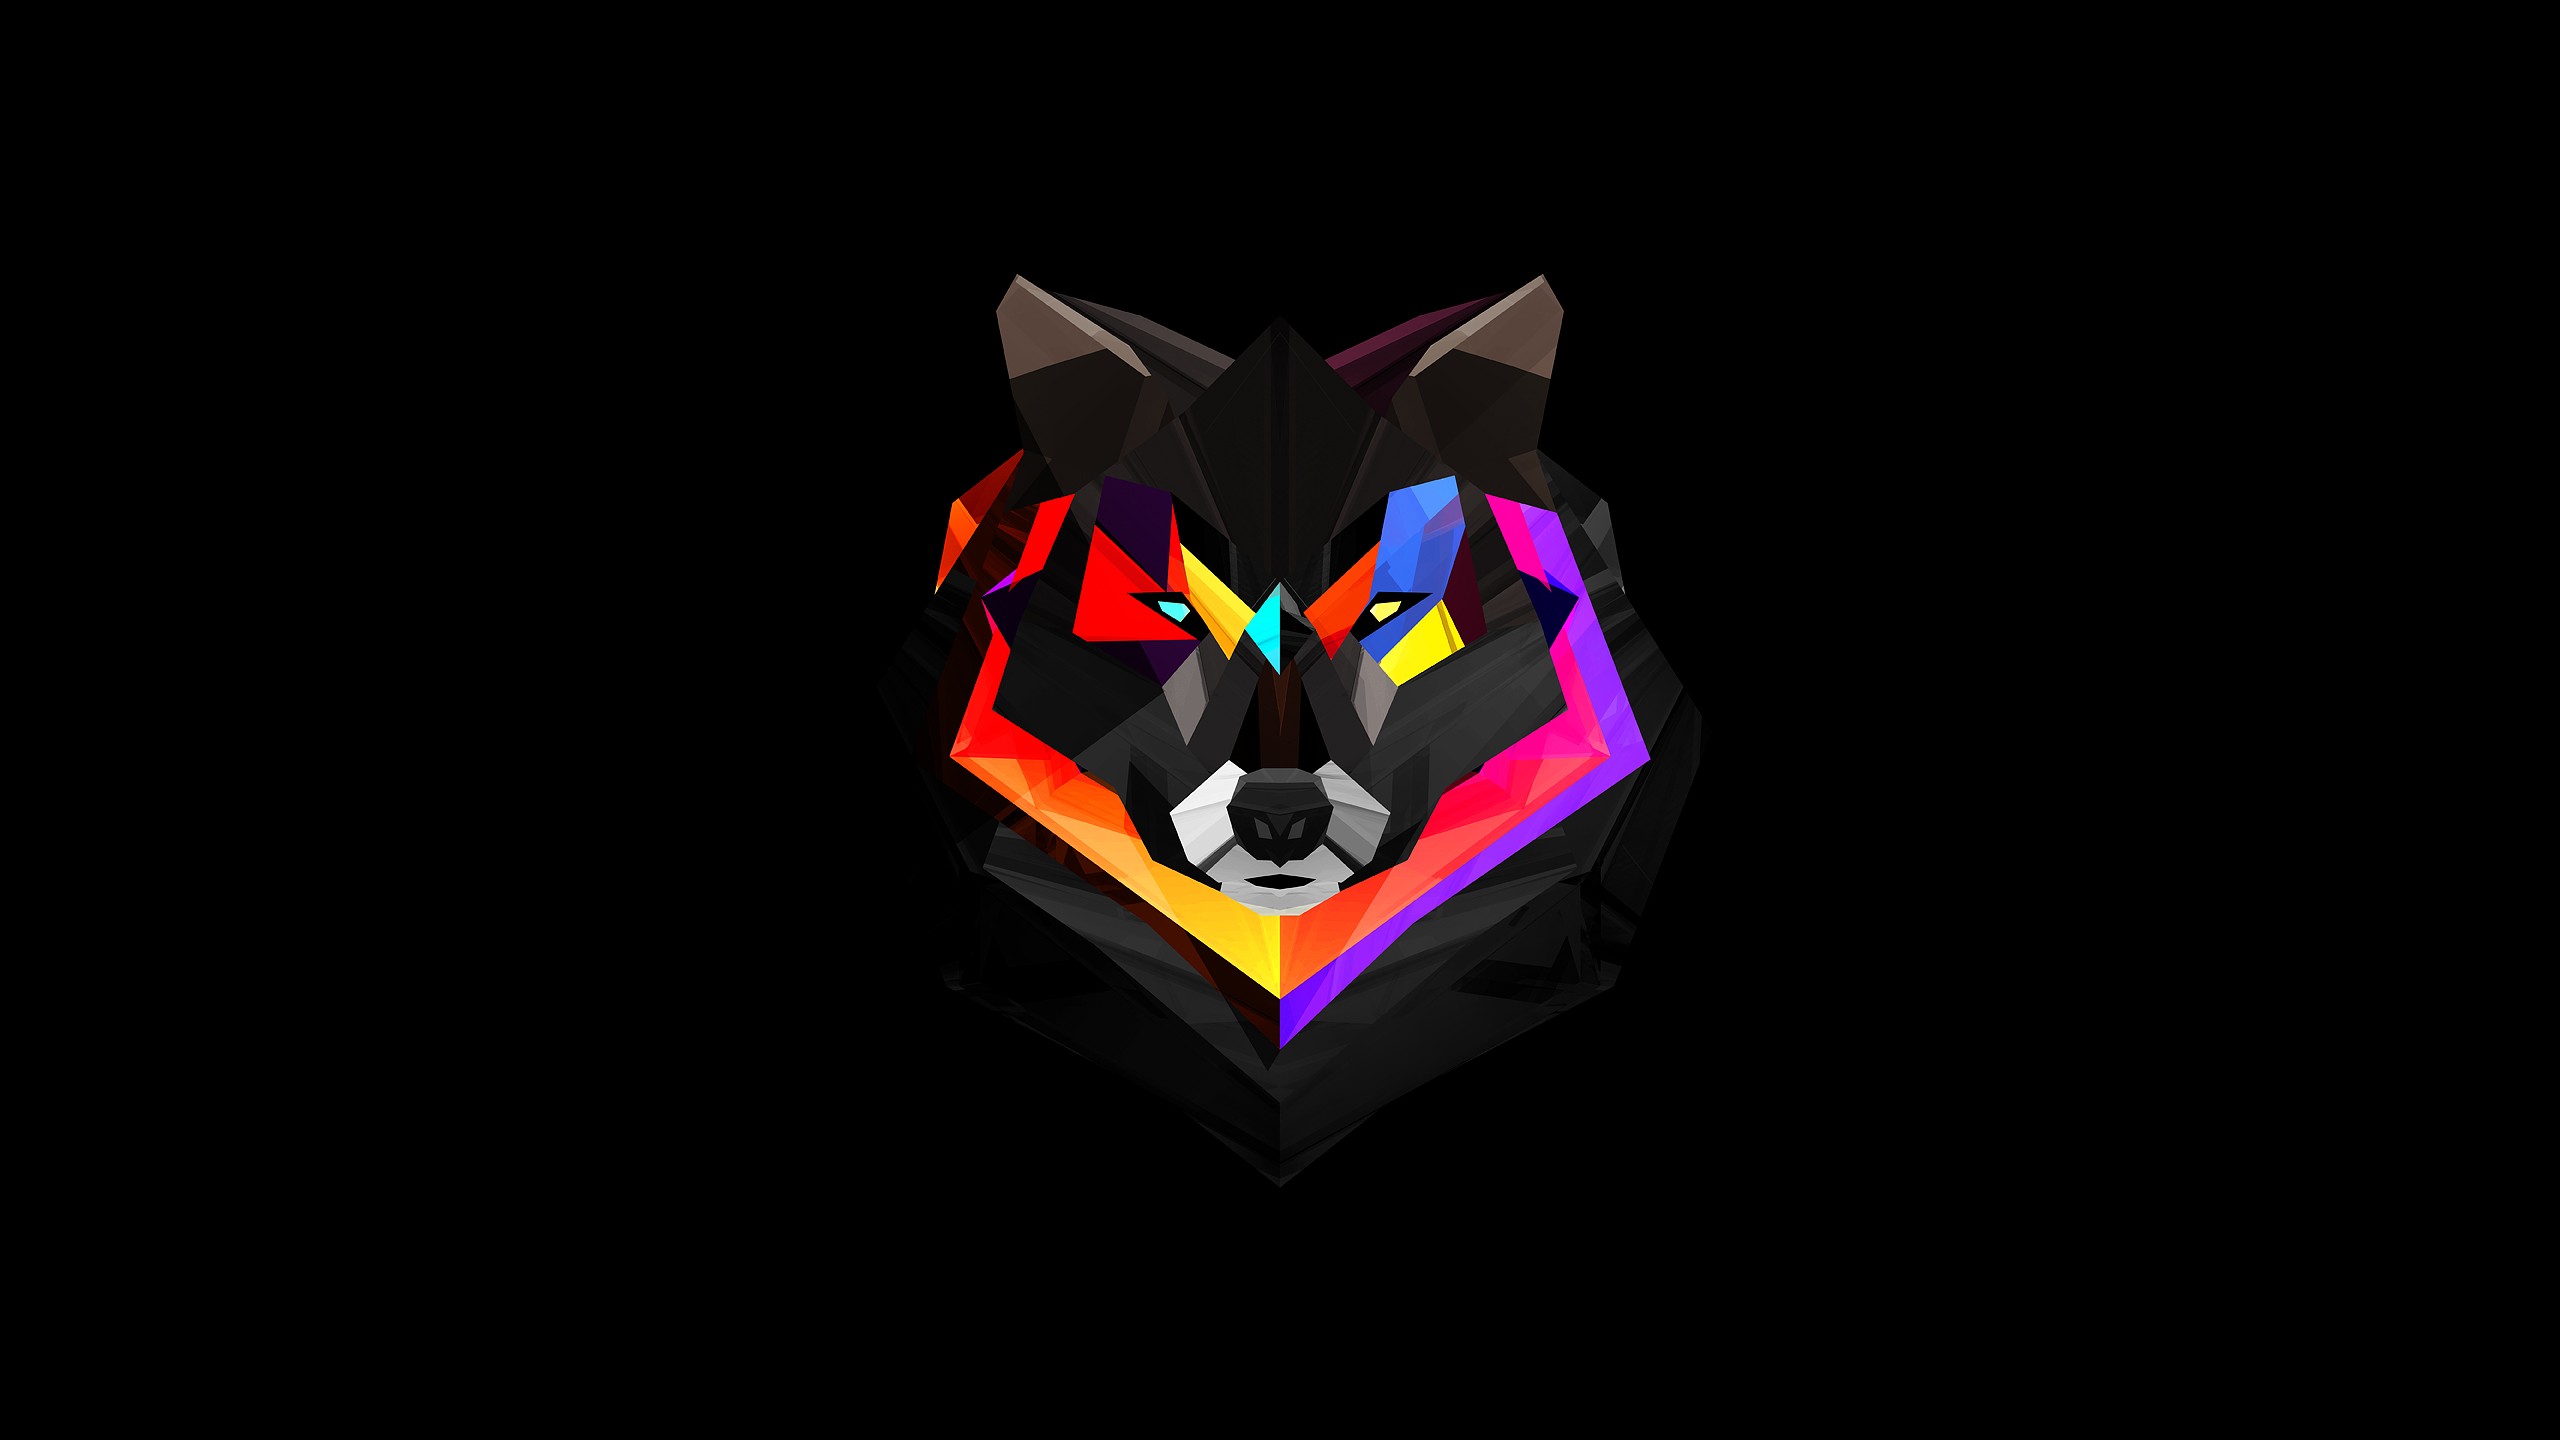 Wallpaper Wolf Face Abstract Colorful Mac Imac